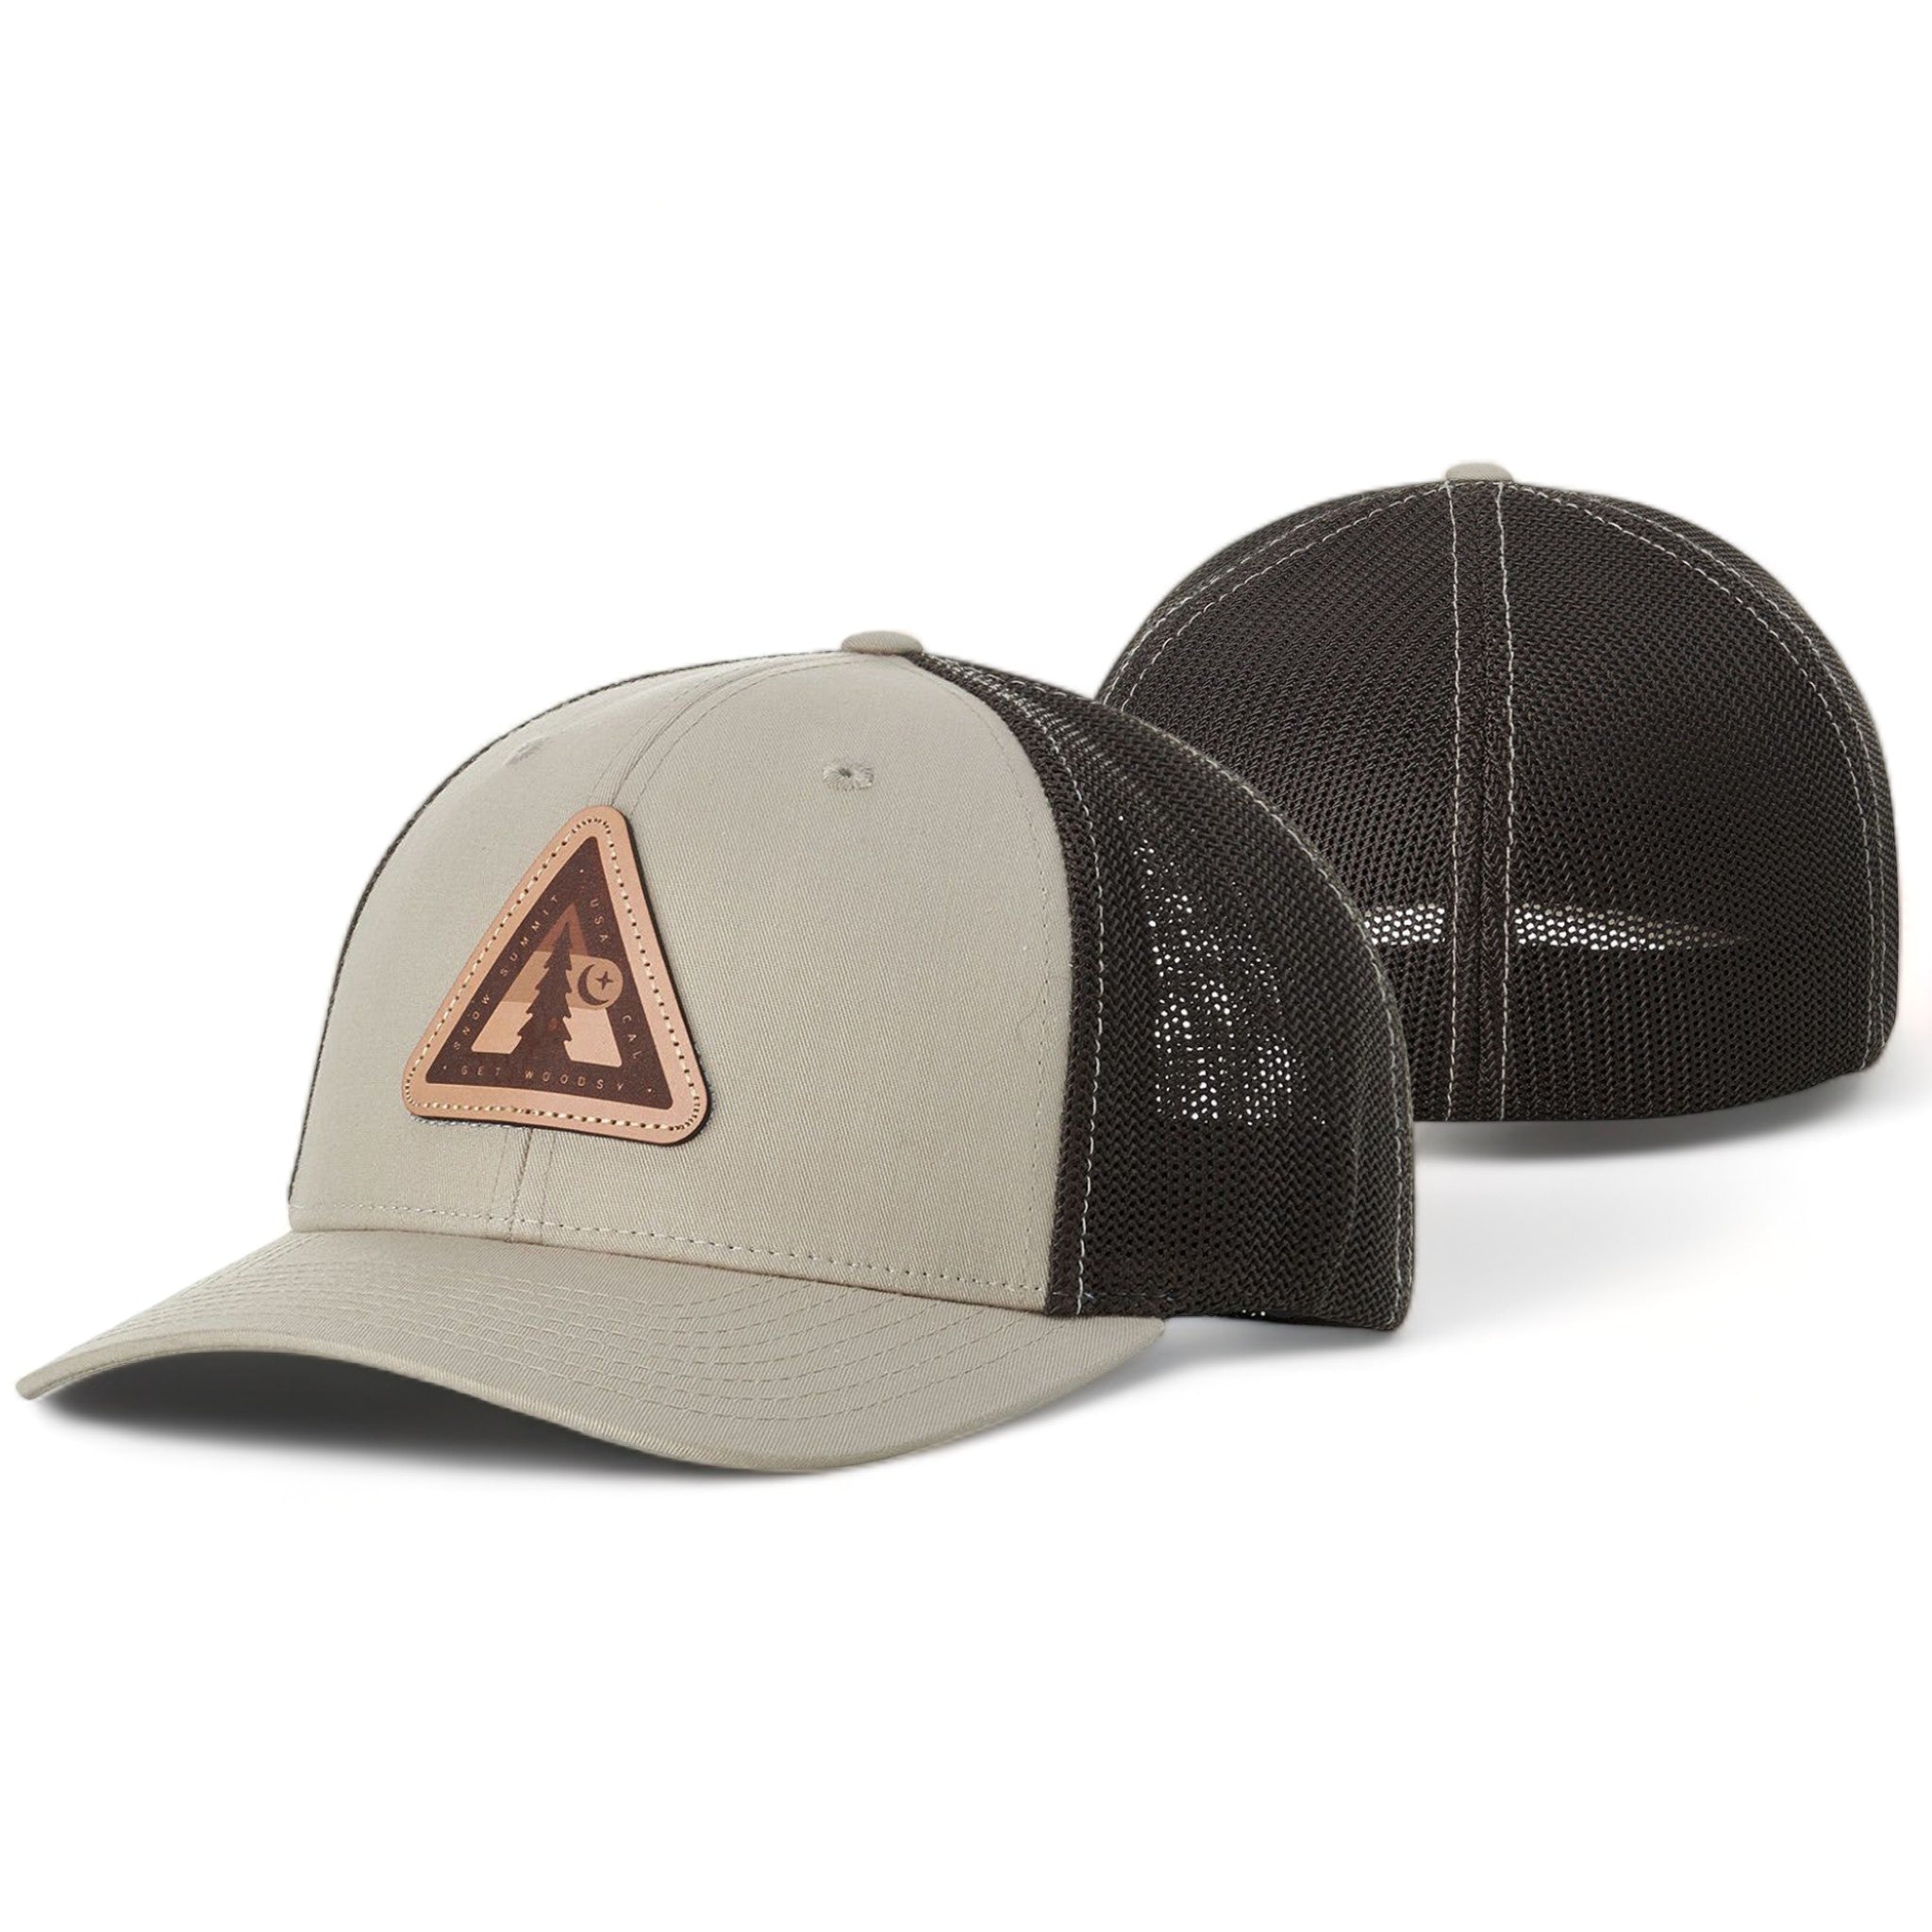 Custom fitted hat with patch